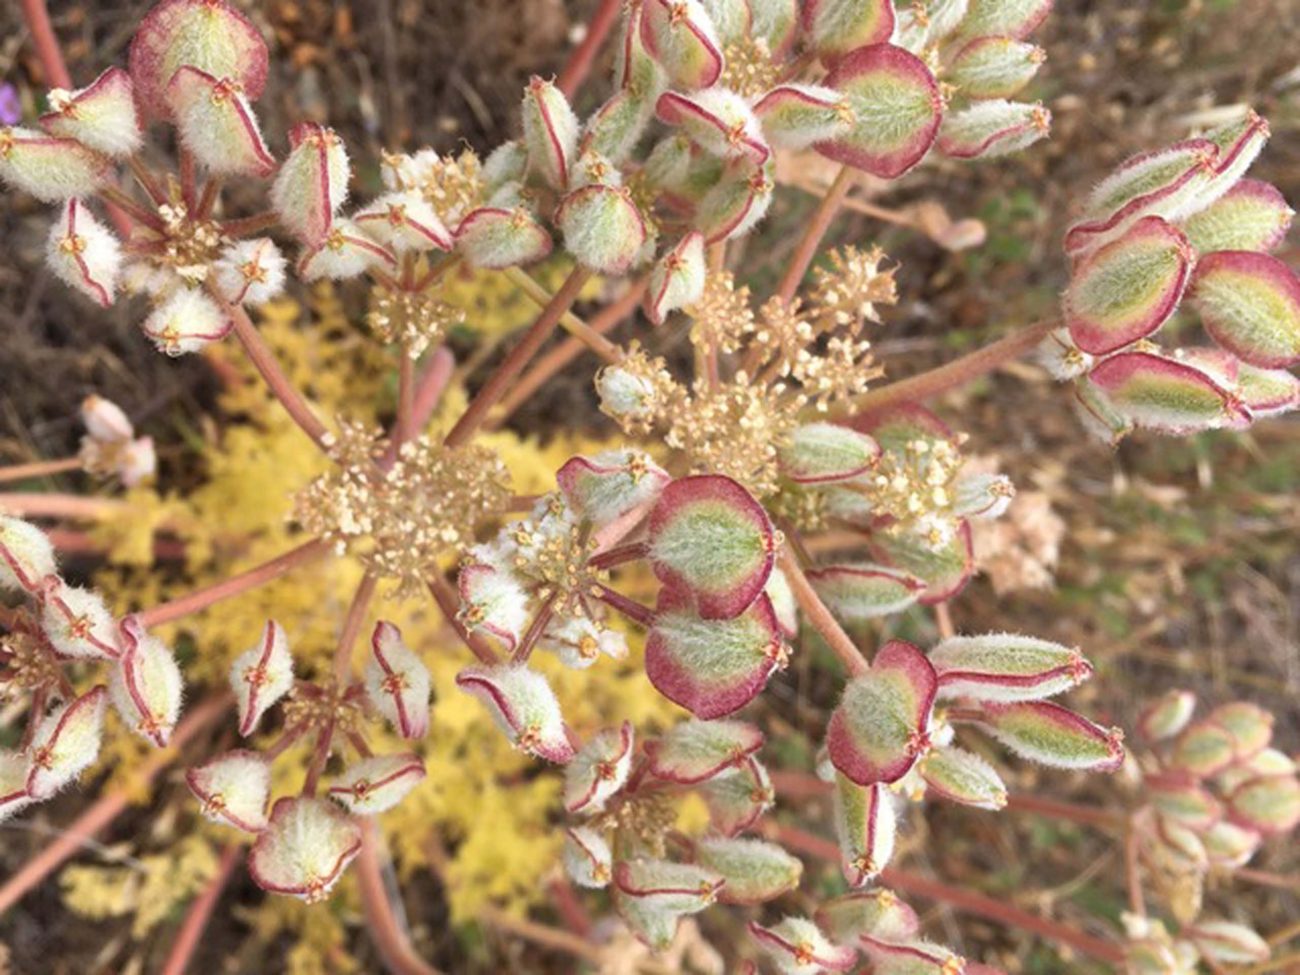 Woolly fruited lomatium in fruit. MA. McCrary.